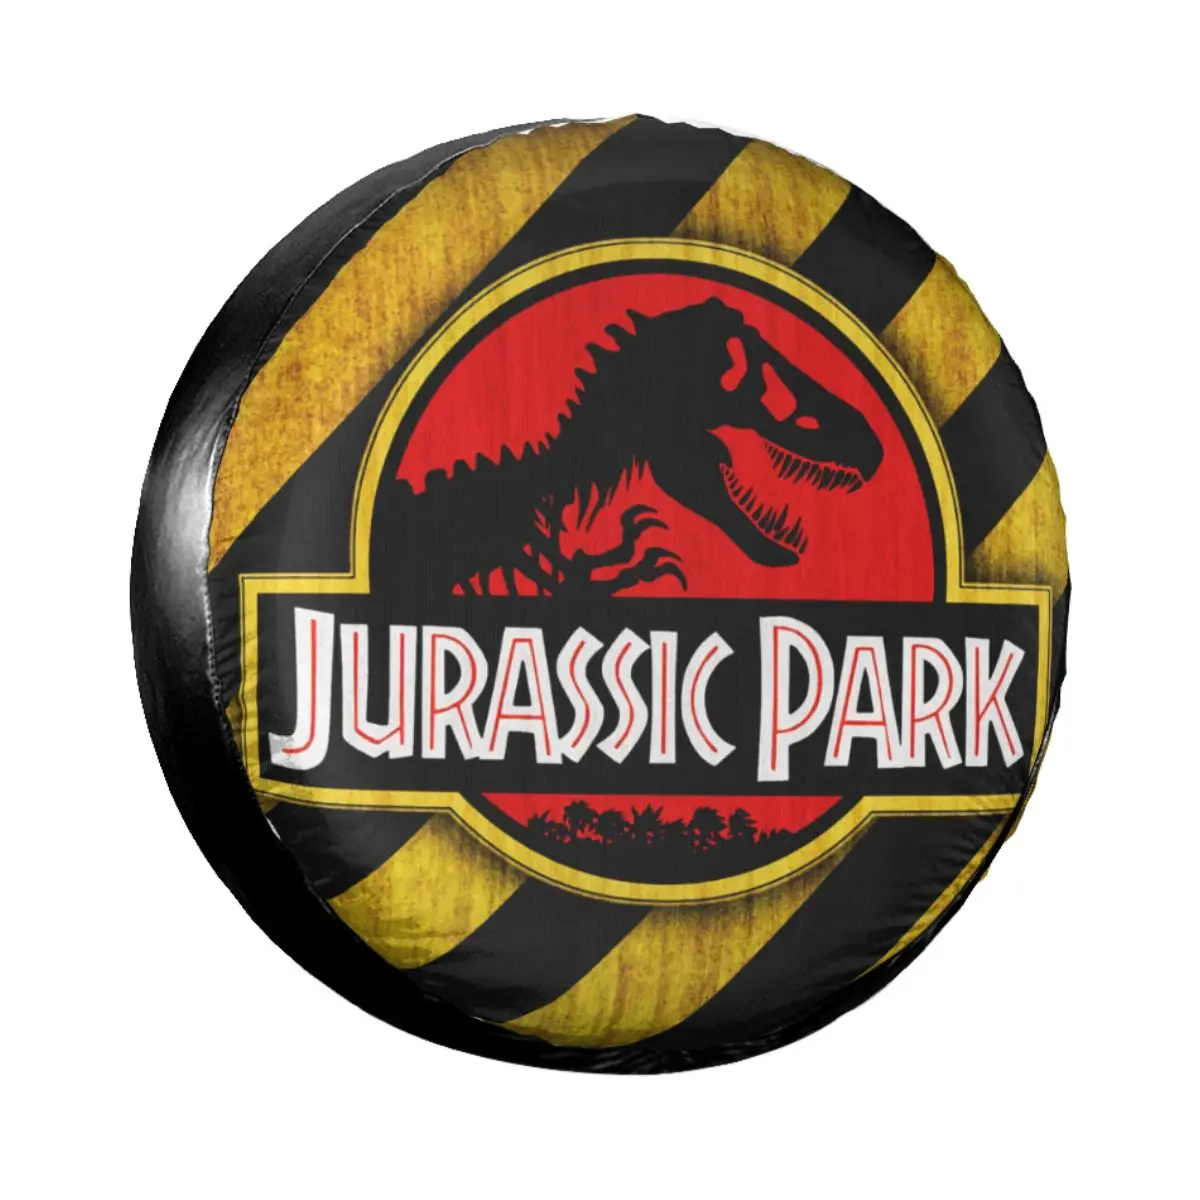 Jurassic Park Ancient Animal Spare Tire Cover for Jeep Hummer Giant Dinsaur Dust-Proof Car Wheel Covers 14" 15" 16" 17" Inch car shade cover Car Covers